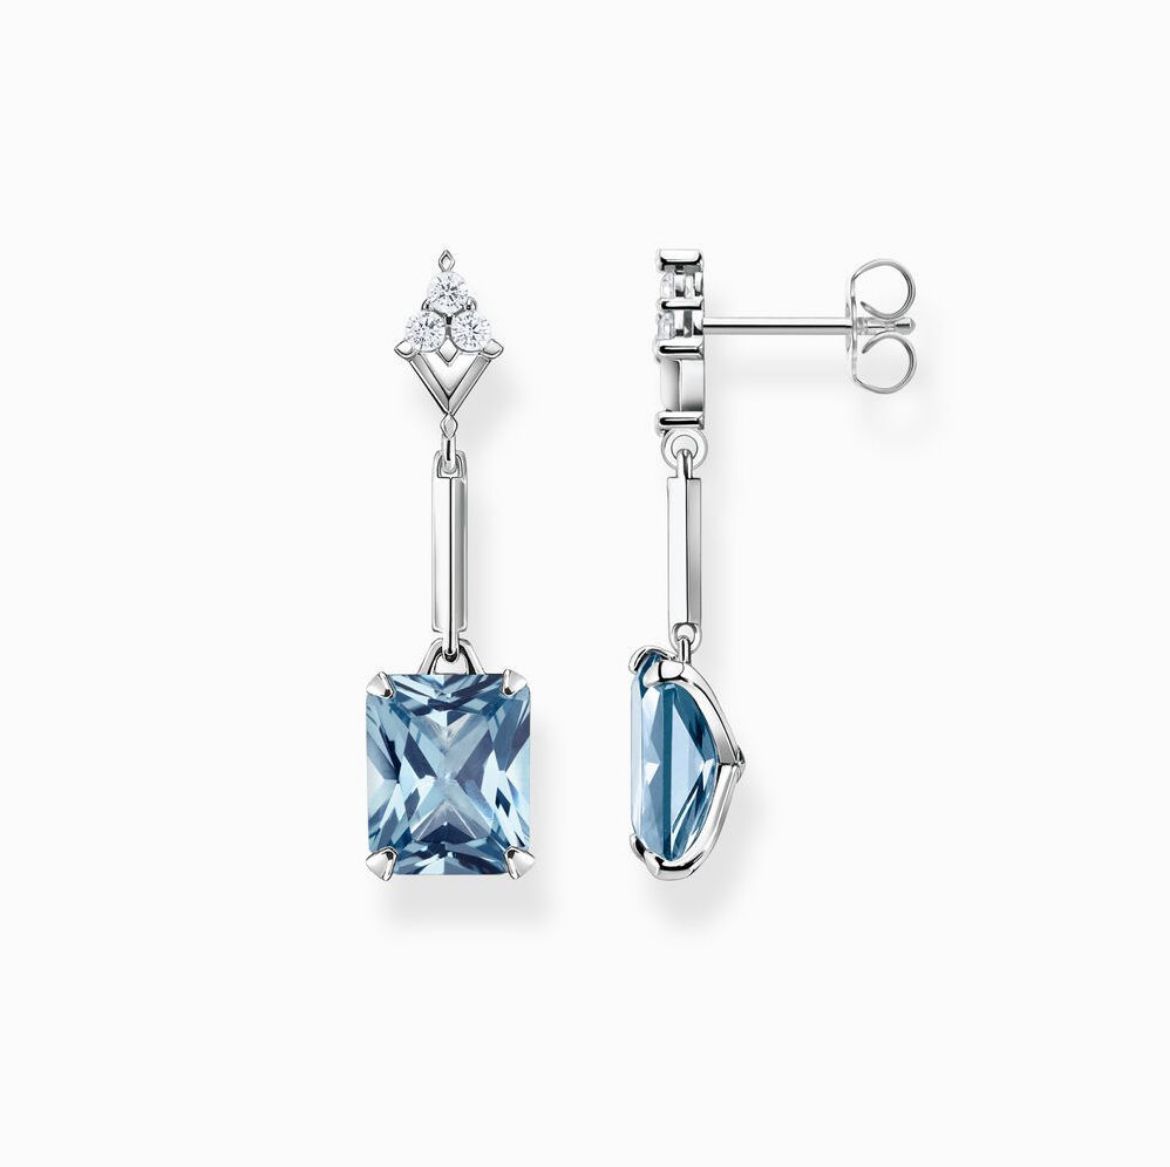 Picture of Aquamarine Coloured Stone Earrings with Cubic Zirconia in Silver